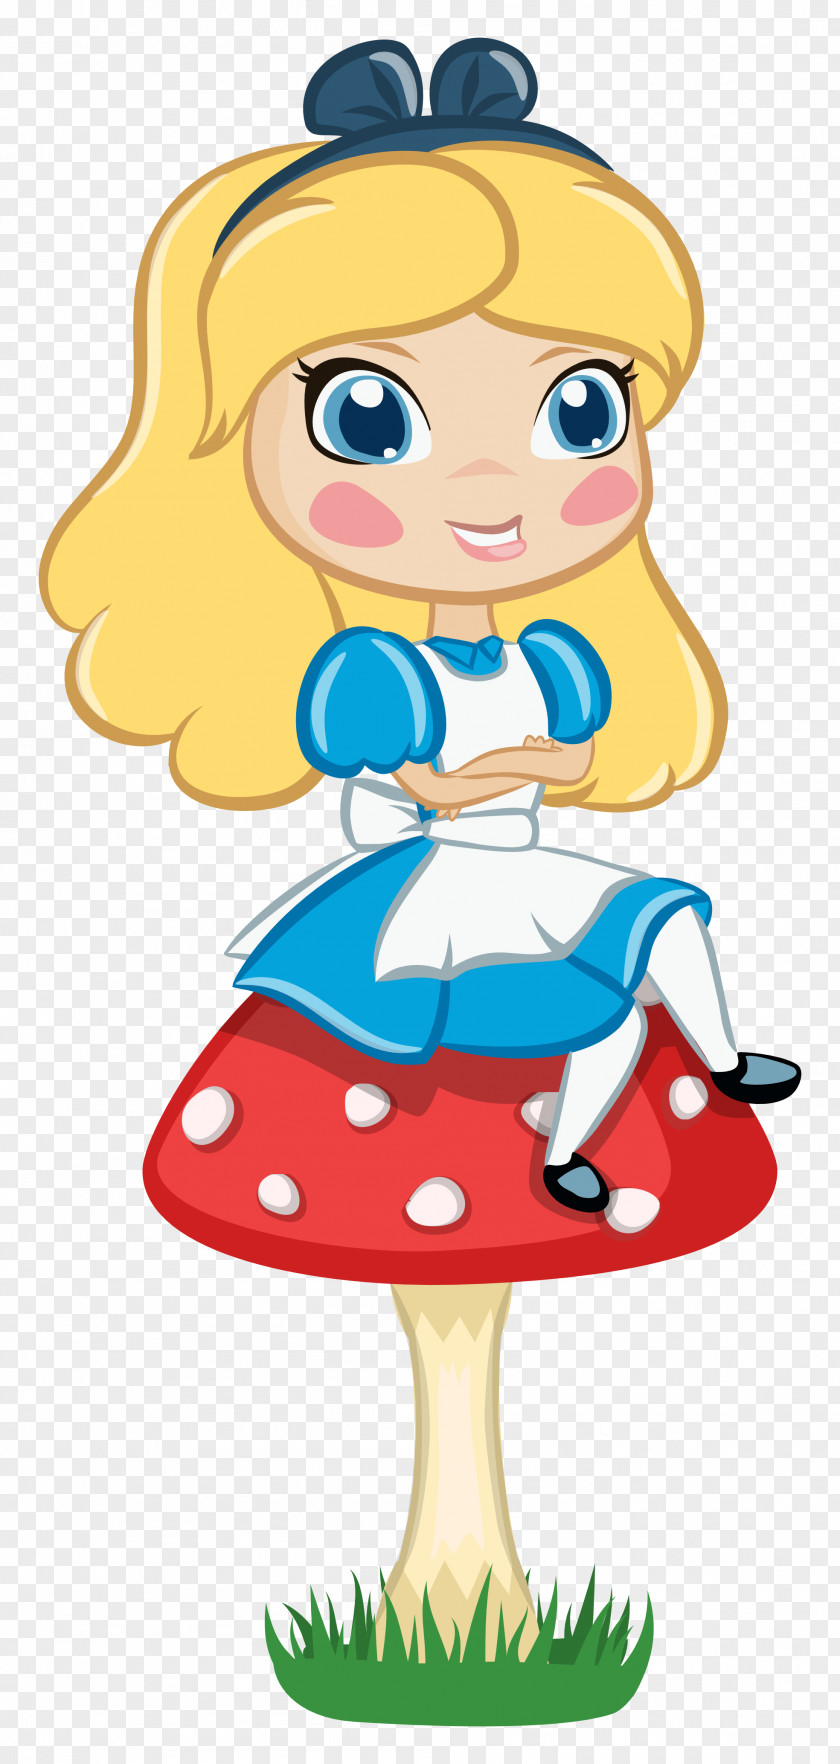 Alice White Rabbit Alice's Adventures In Wonderland The Mad Hatter Queen Of Hearts Cheshire Cat PNG